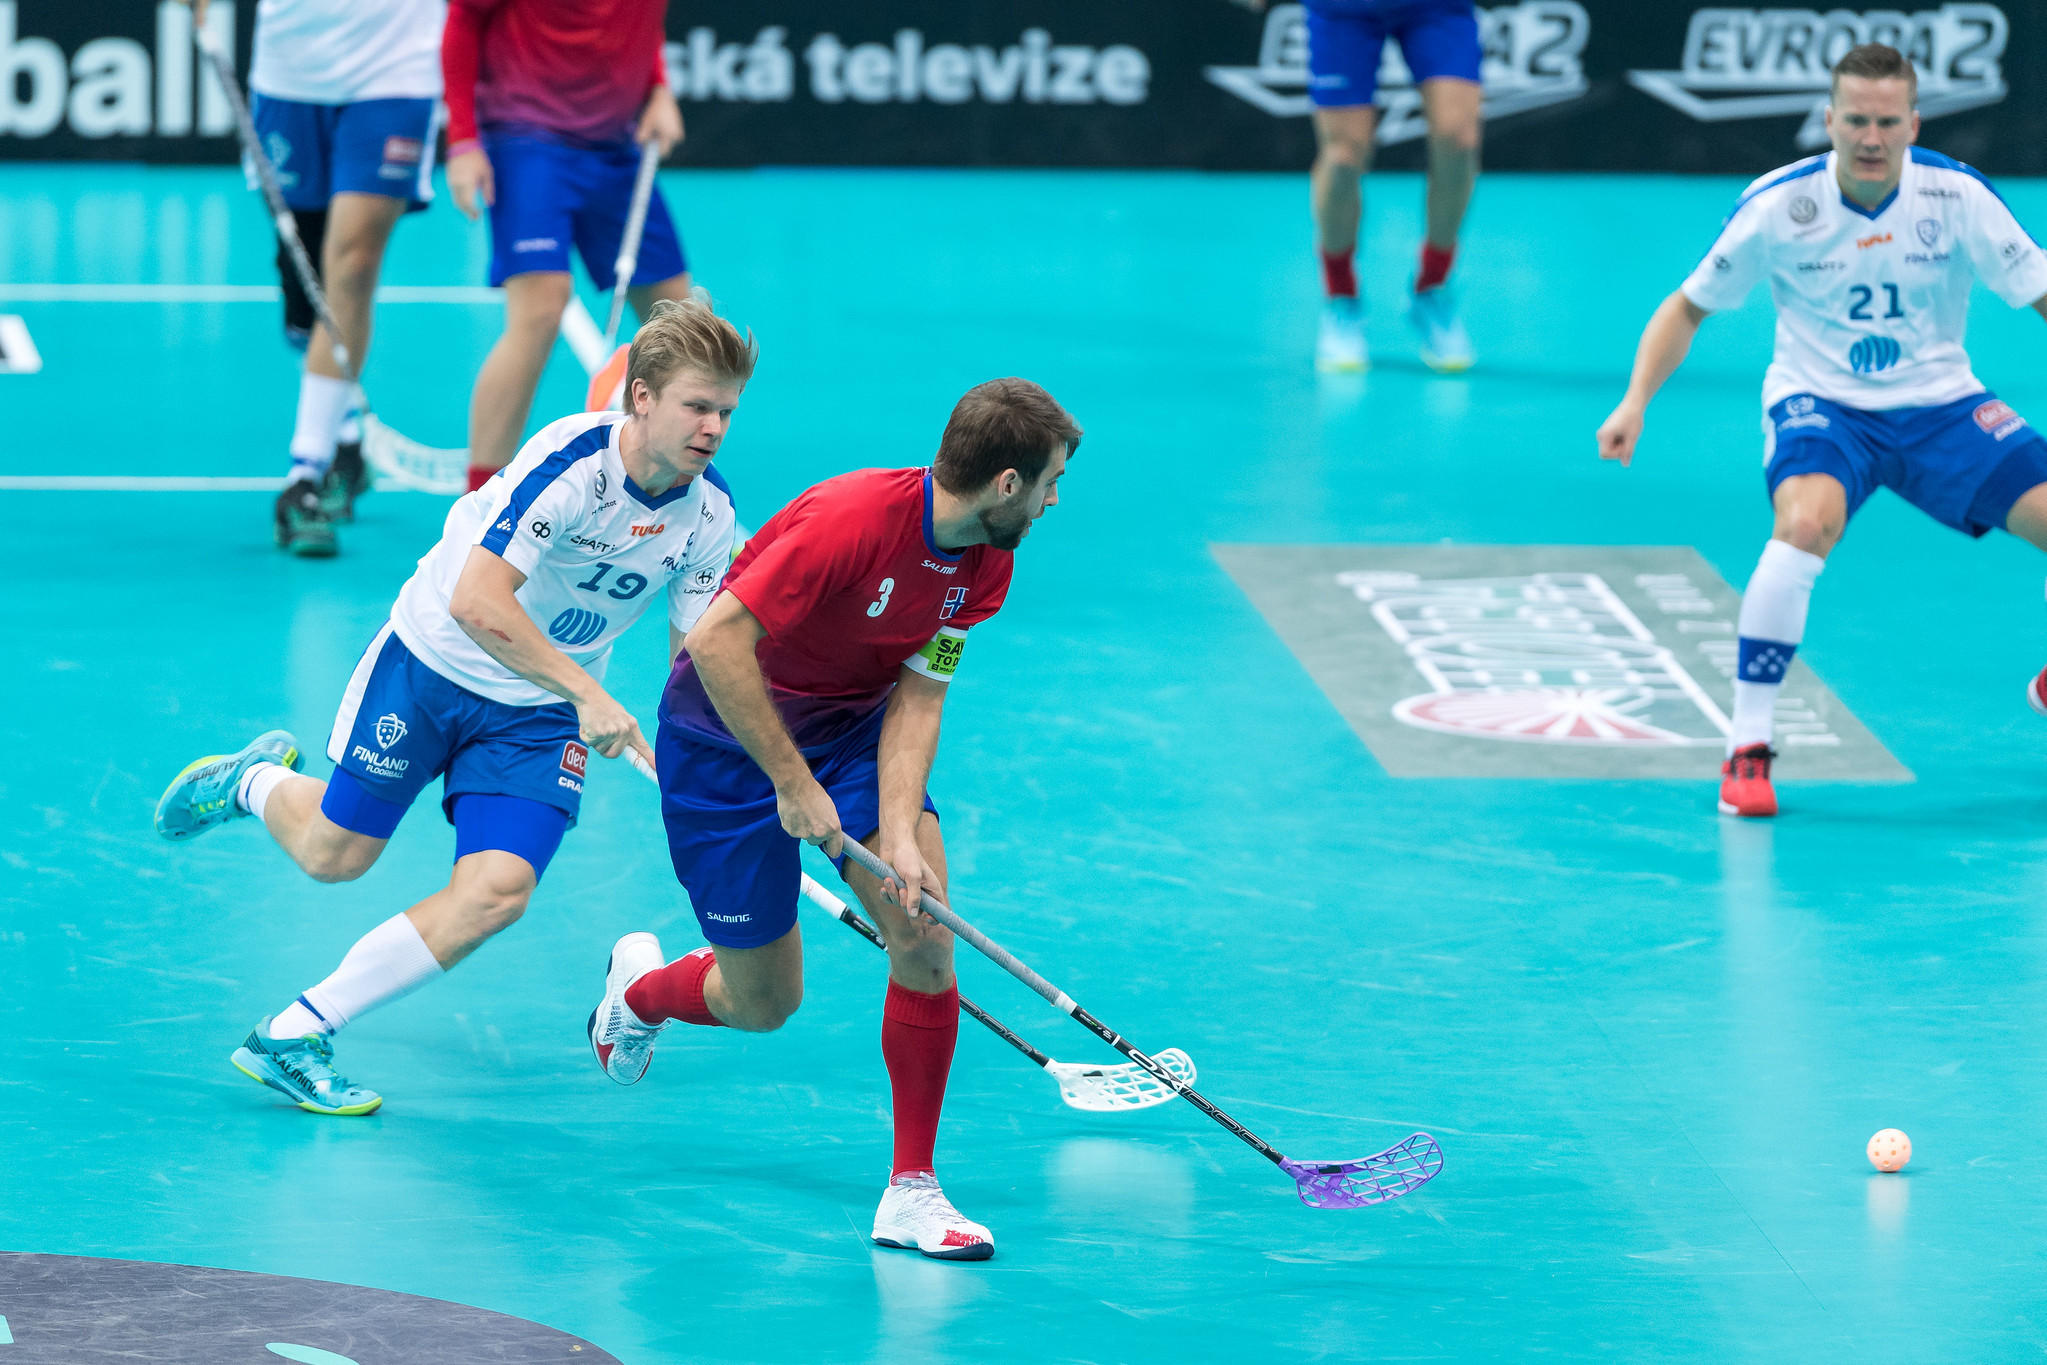 Individual teams will be asked if they are able to attend this year's Men's World Floorball Championship ©IFF